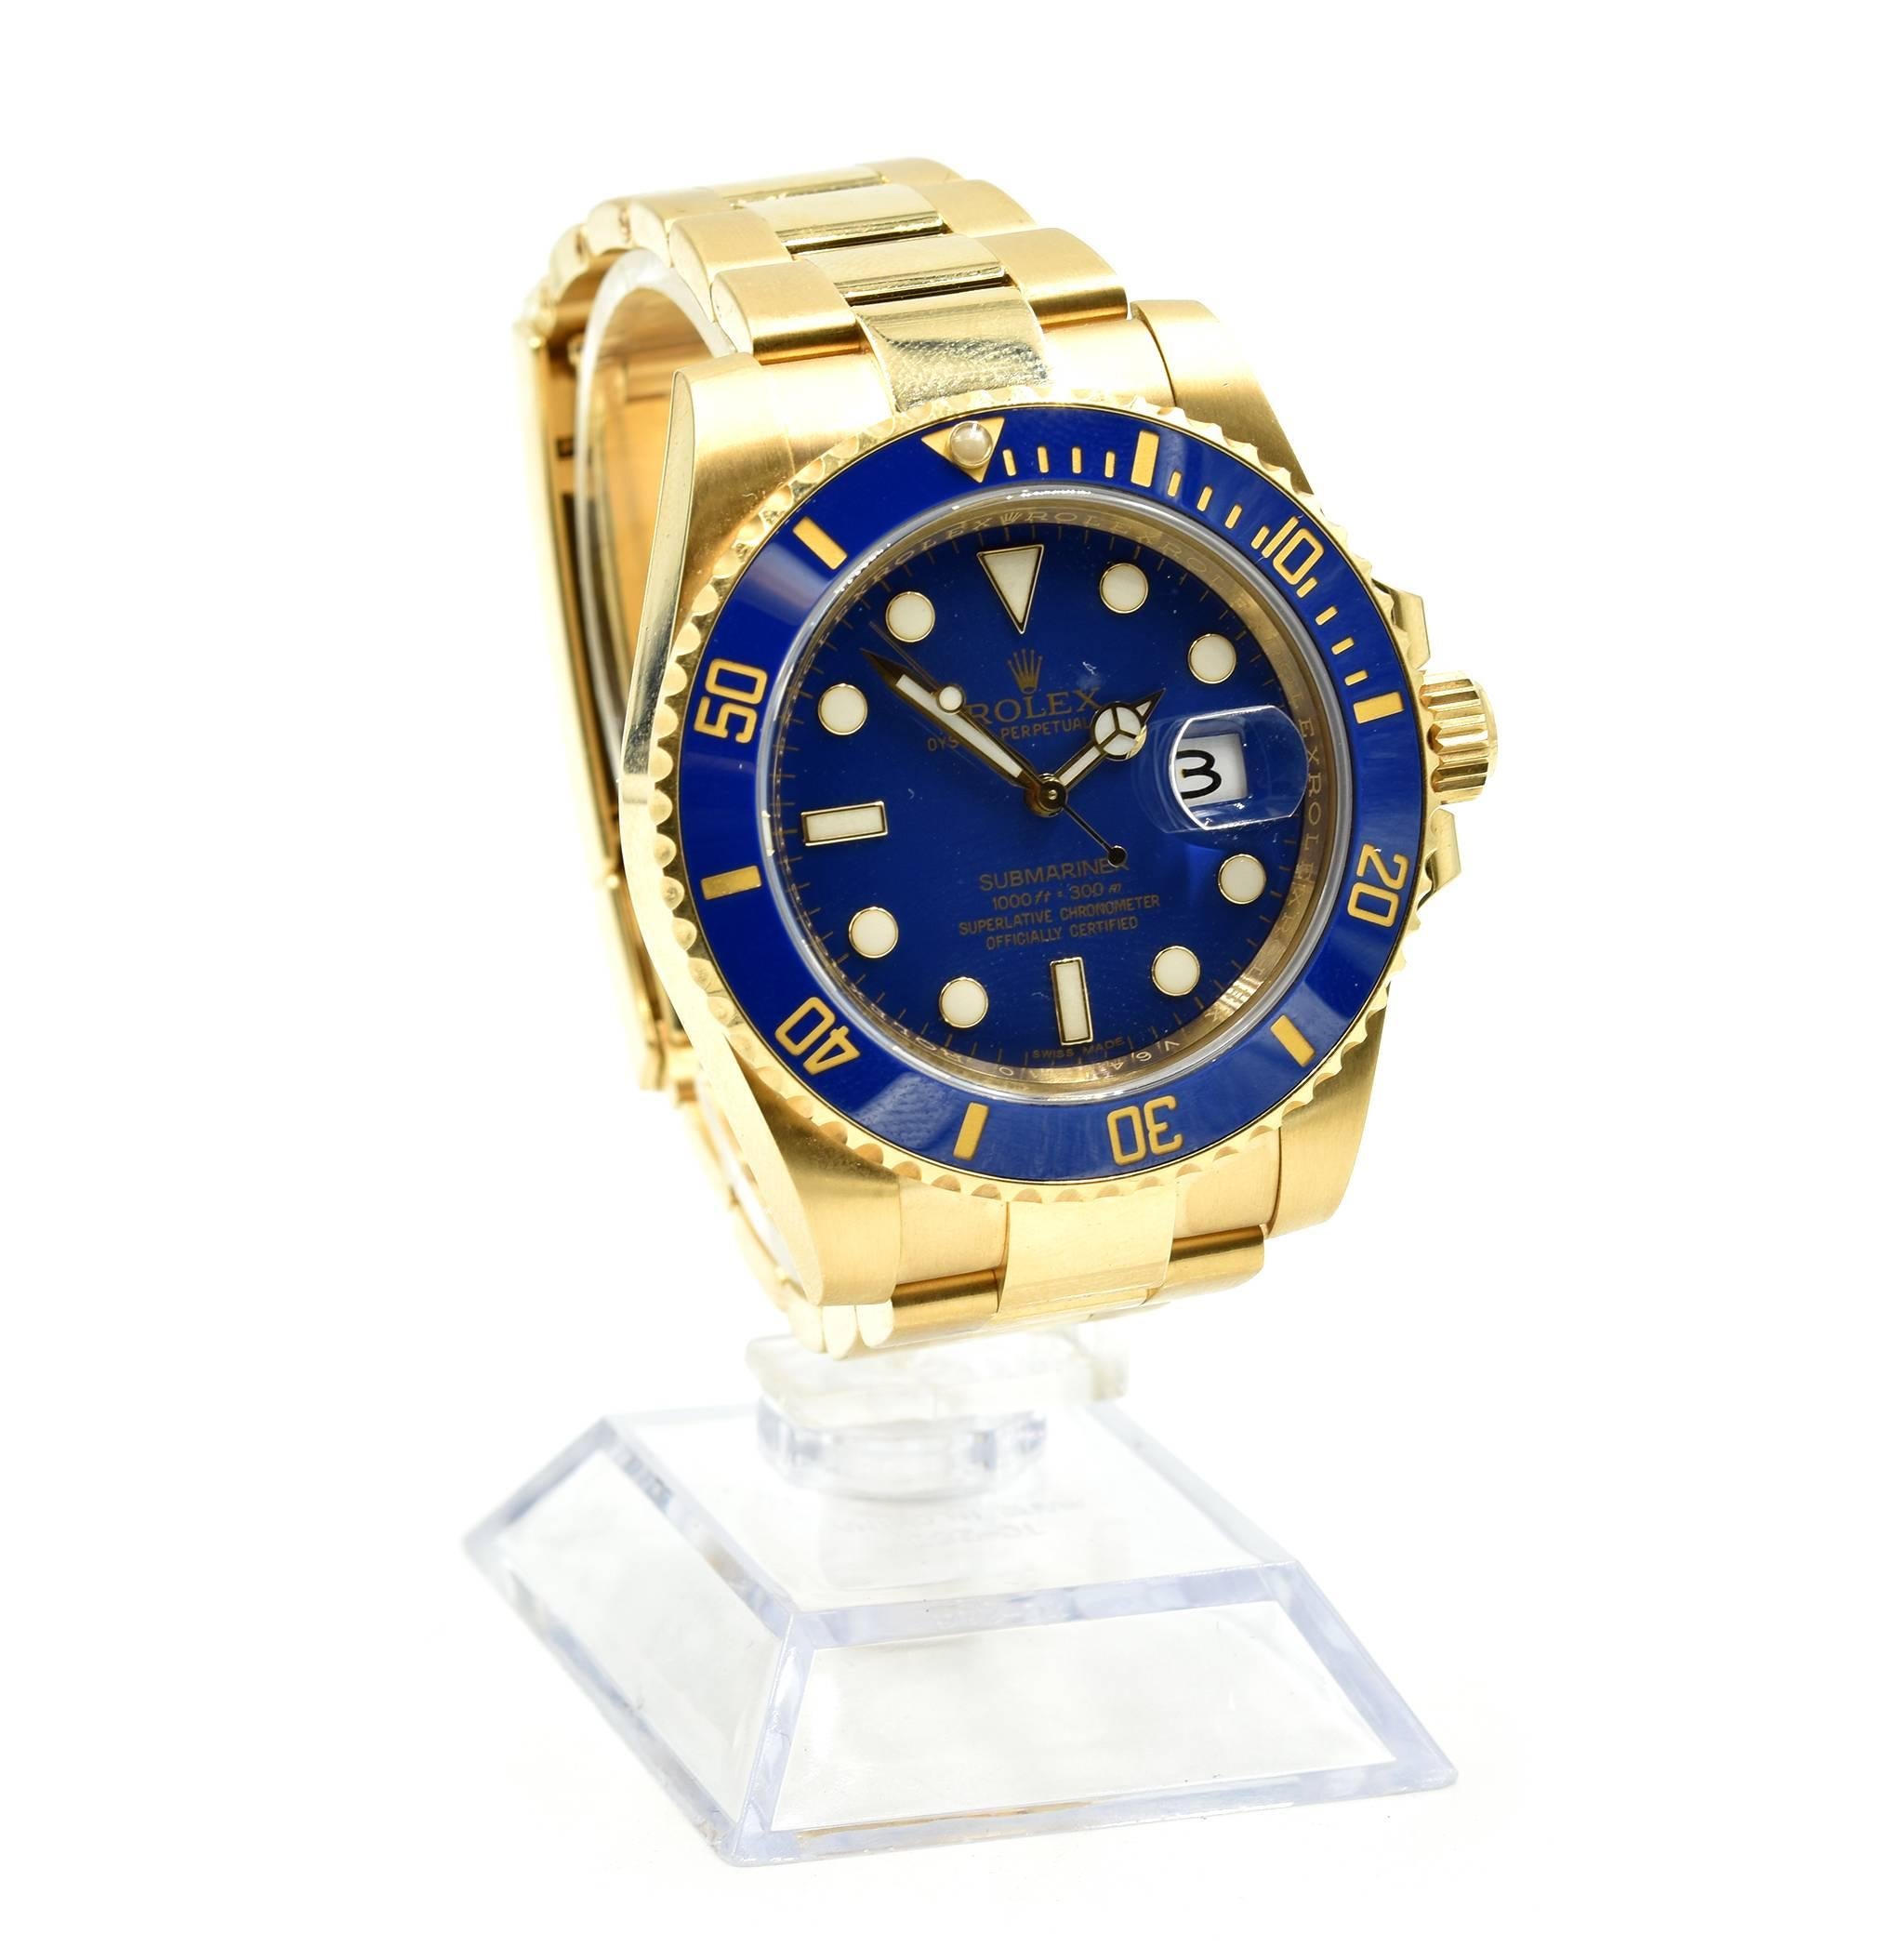 Movement: Swiss made Rolex caliber 3135 automatic movement
Function: hours, minutes, seconds, date
Case: round 40mm stainless steel case with blue ceramic 18k yellow gold diving bezel, sapphire protective crystal, screw-down crown, water resistant